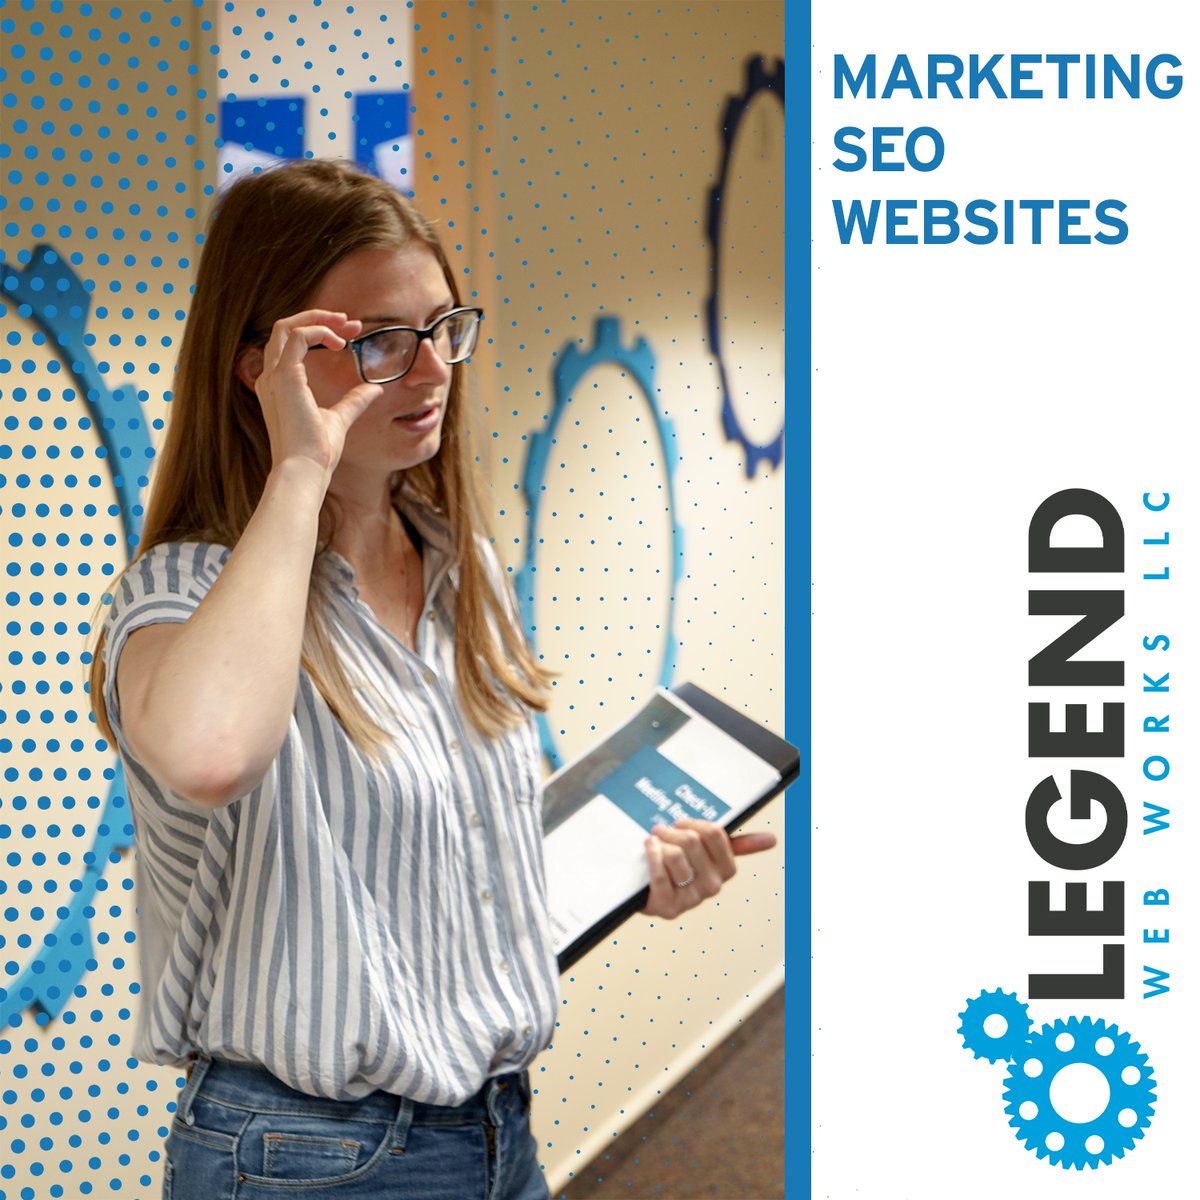 First impressions can be everything, what does your website say about your story? 📖

If you are not happy with your story, let's write it together.✏️
legendwebworks.com/contact-us/ 

#LegendWebWorks #CincinnatiMarketing #CincinnatiWebDesign #SupportSmallBusiness #CoreWebVital